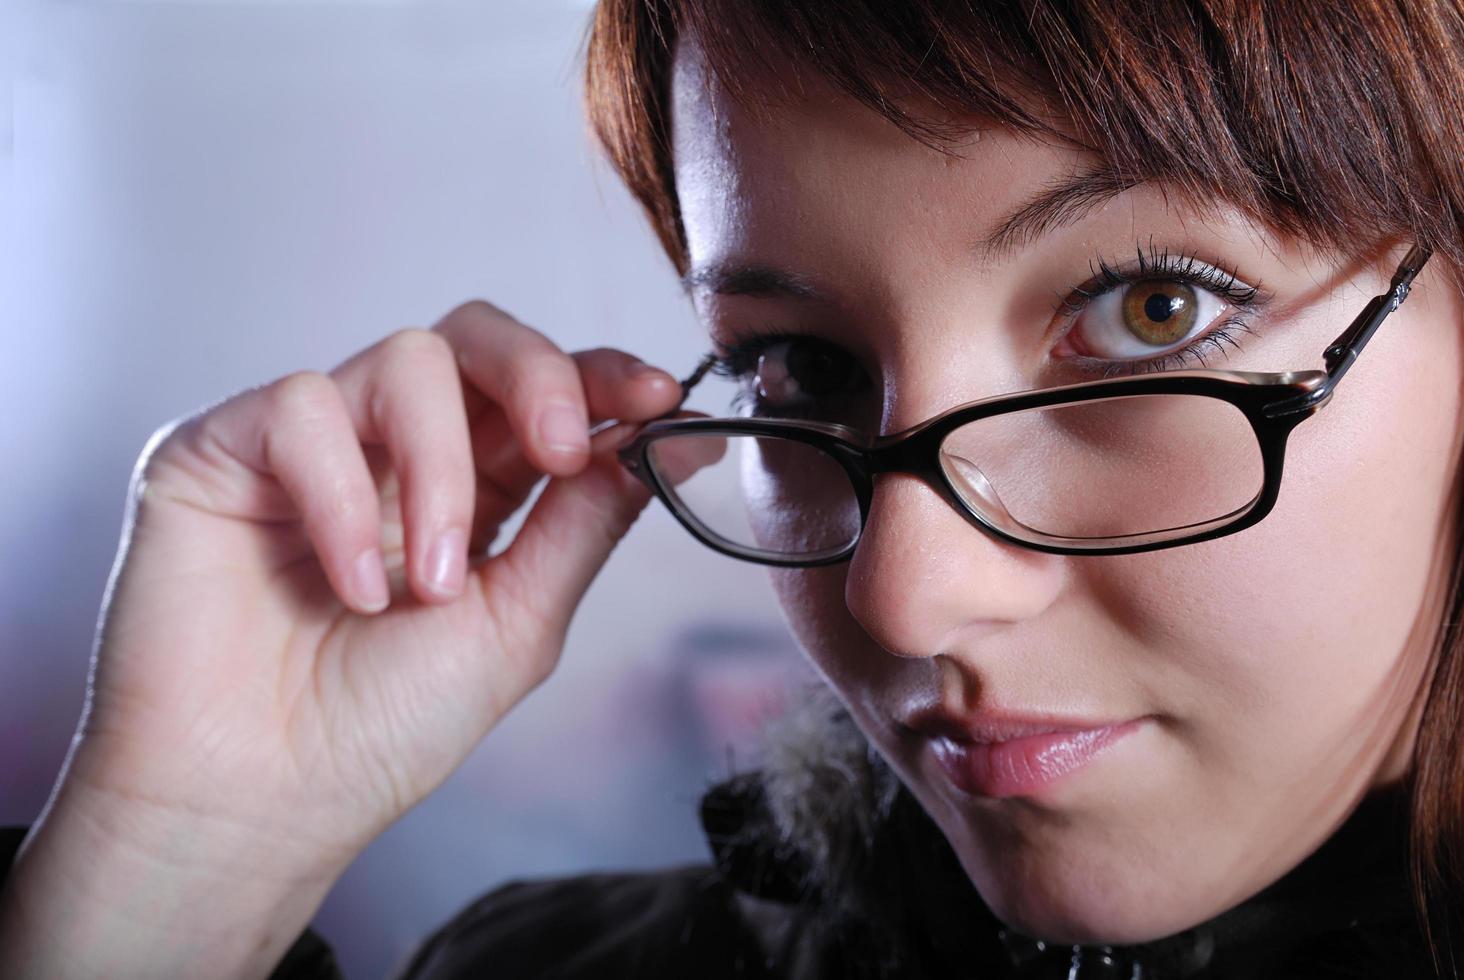 Portrai of a young woman wearing glasses photo